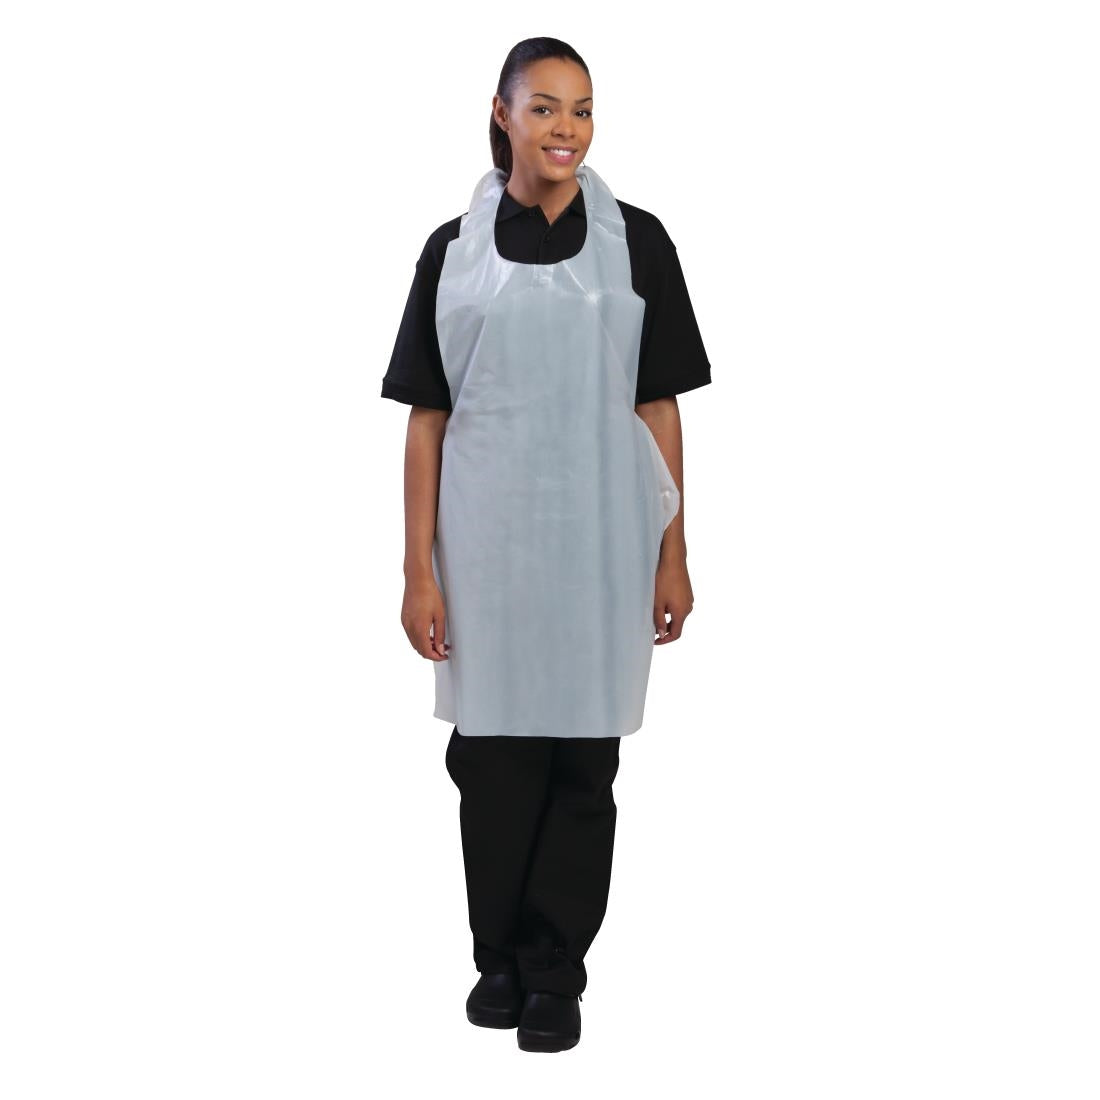 A310 Disposable Polythene Bib Aprons 14.5 Micron White (Pack of 100) JD Catering Equipment Solutions Ltd